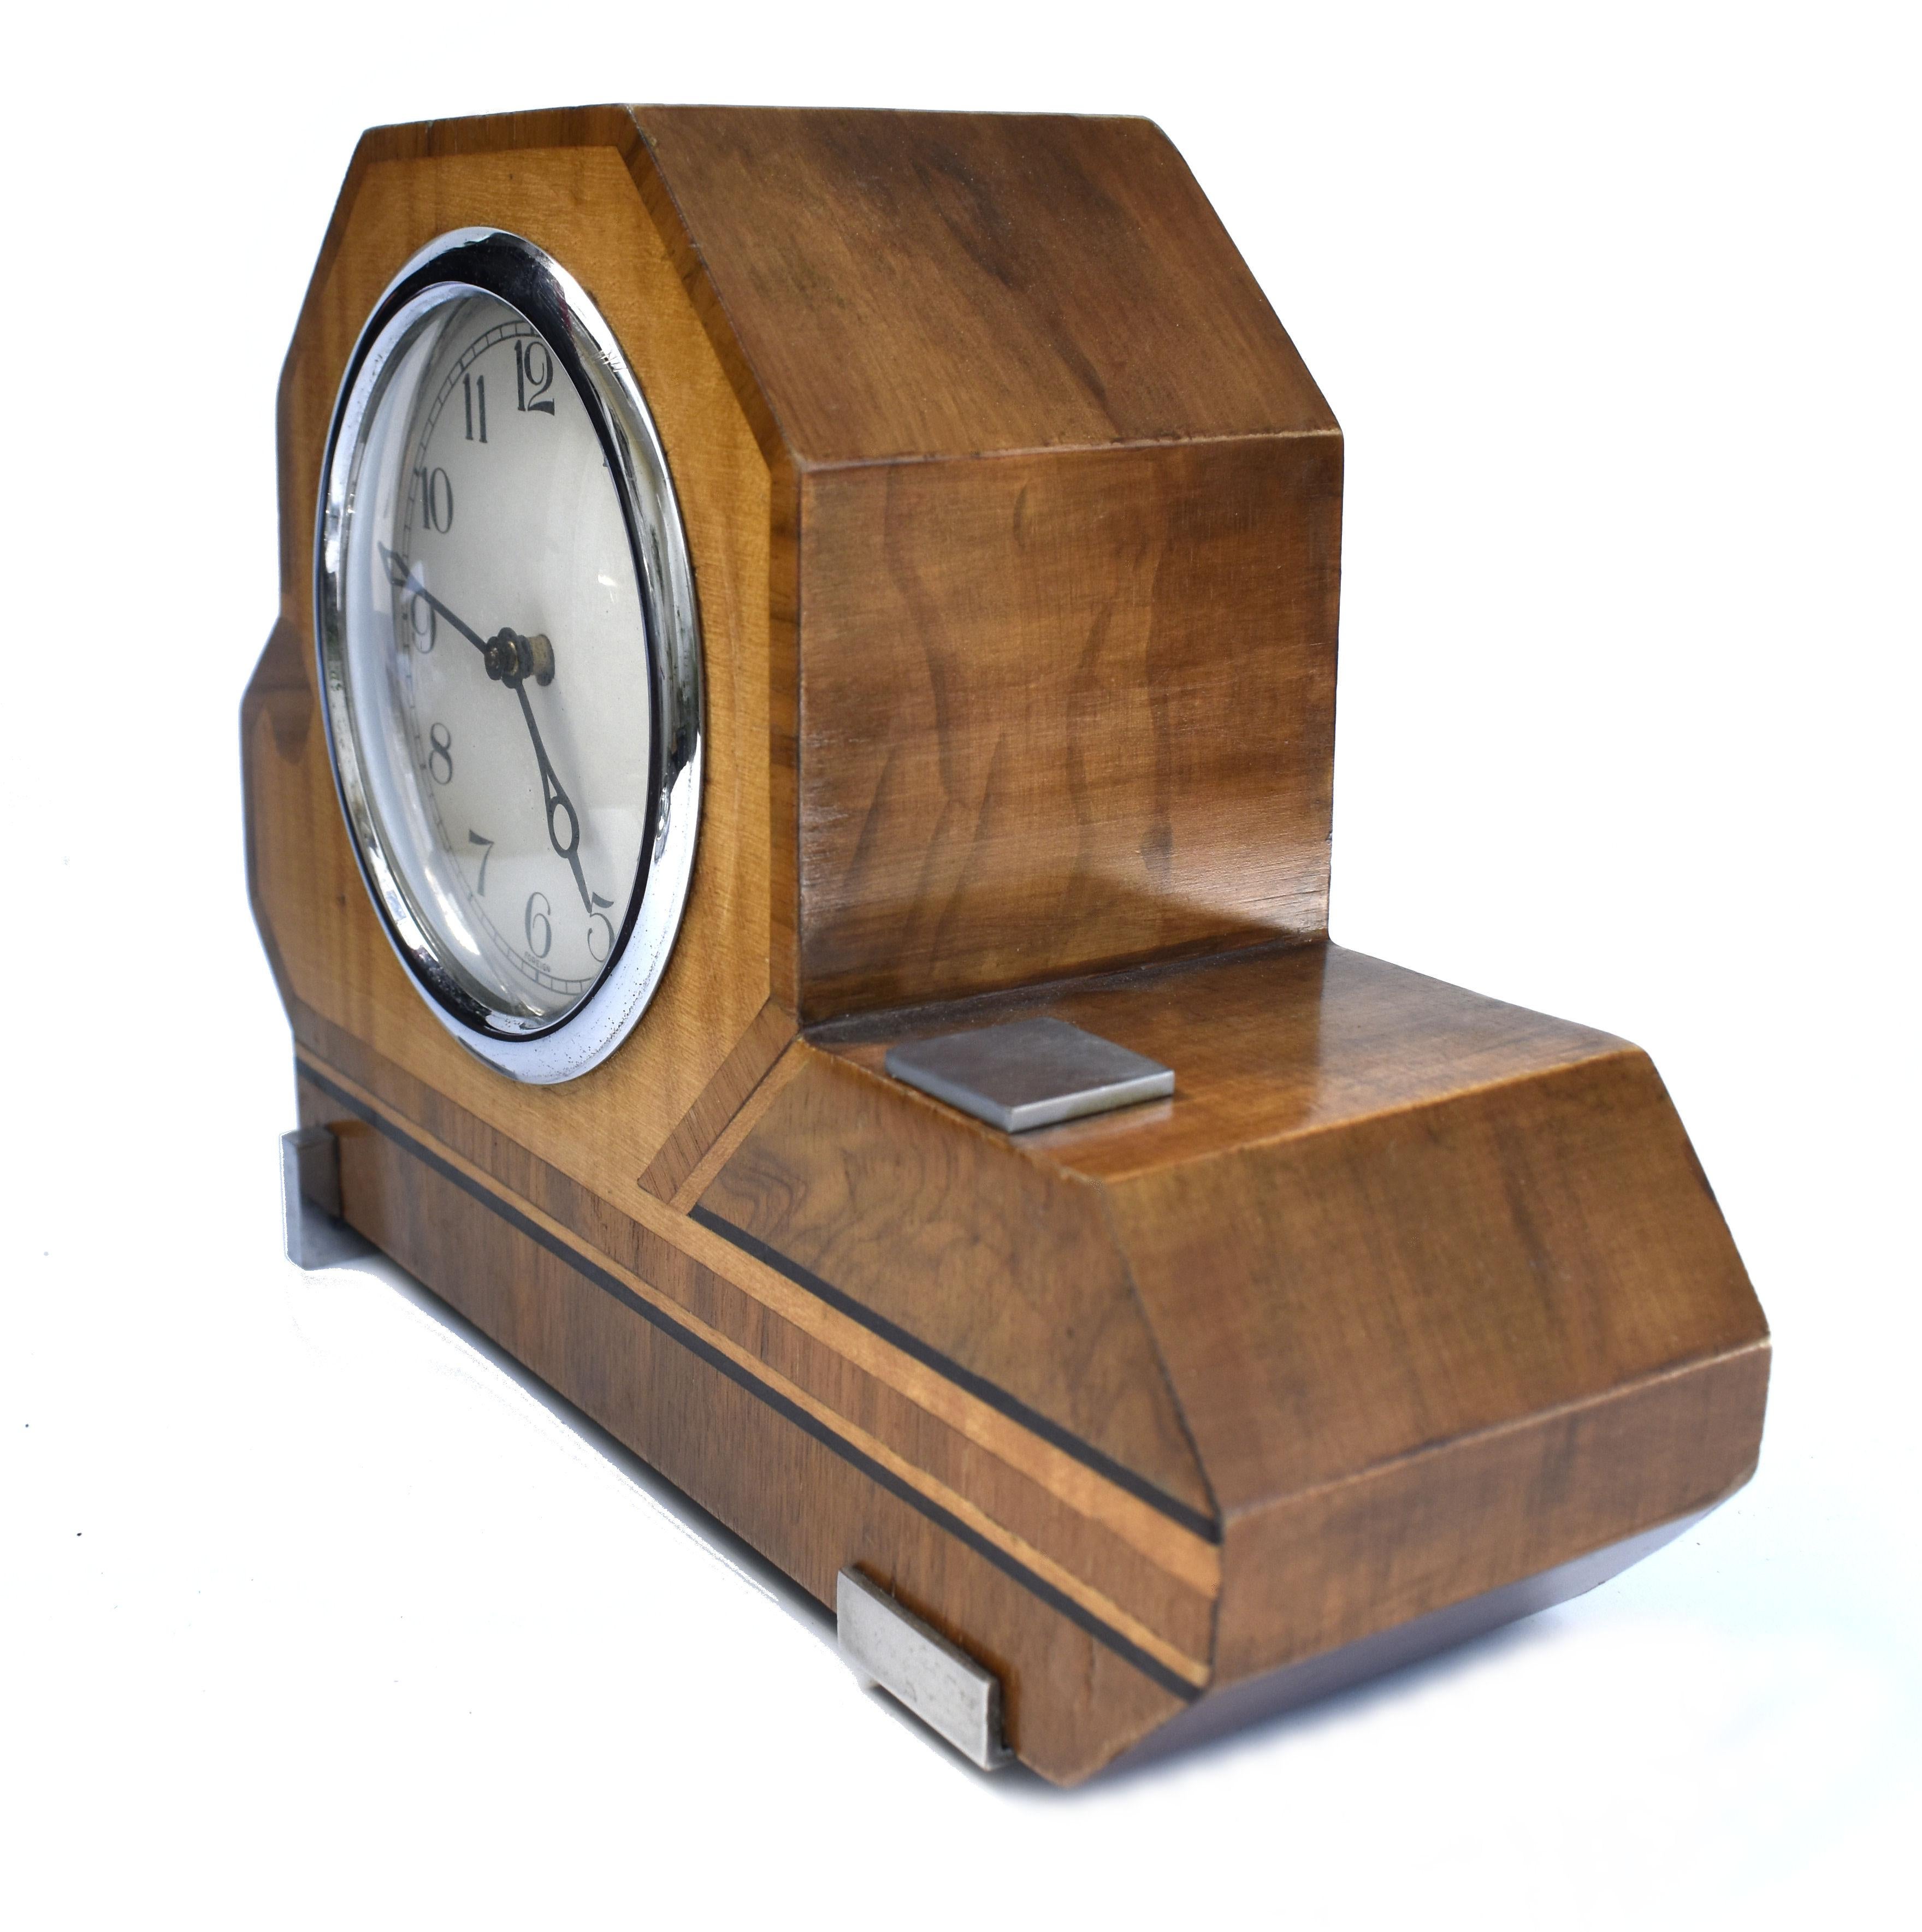 Brass Art Deco Geometric Two Tone Wooden Mantle Clock, English, c1930 For Sale